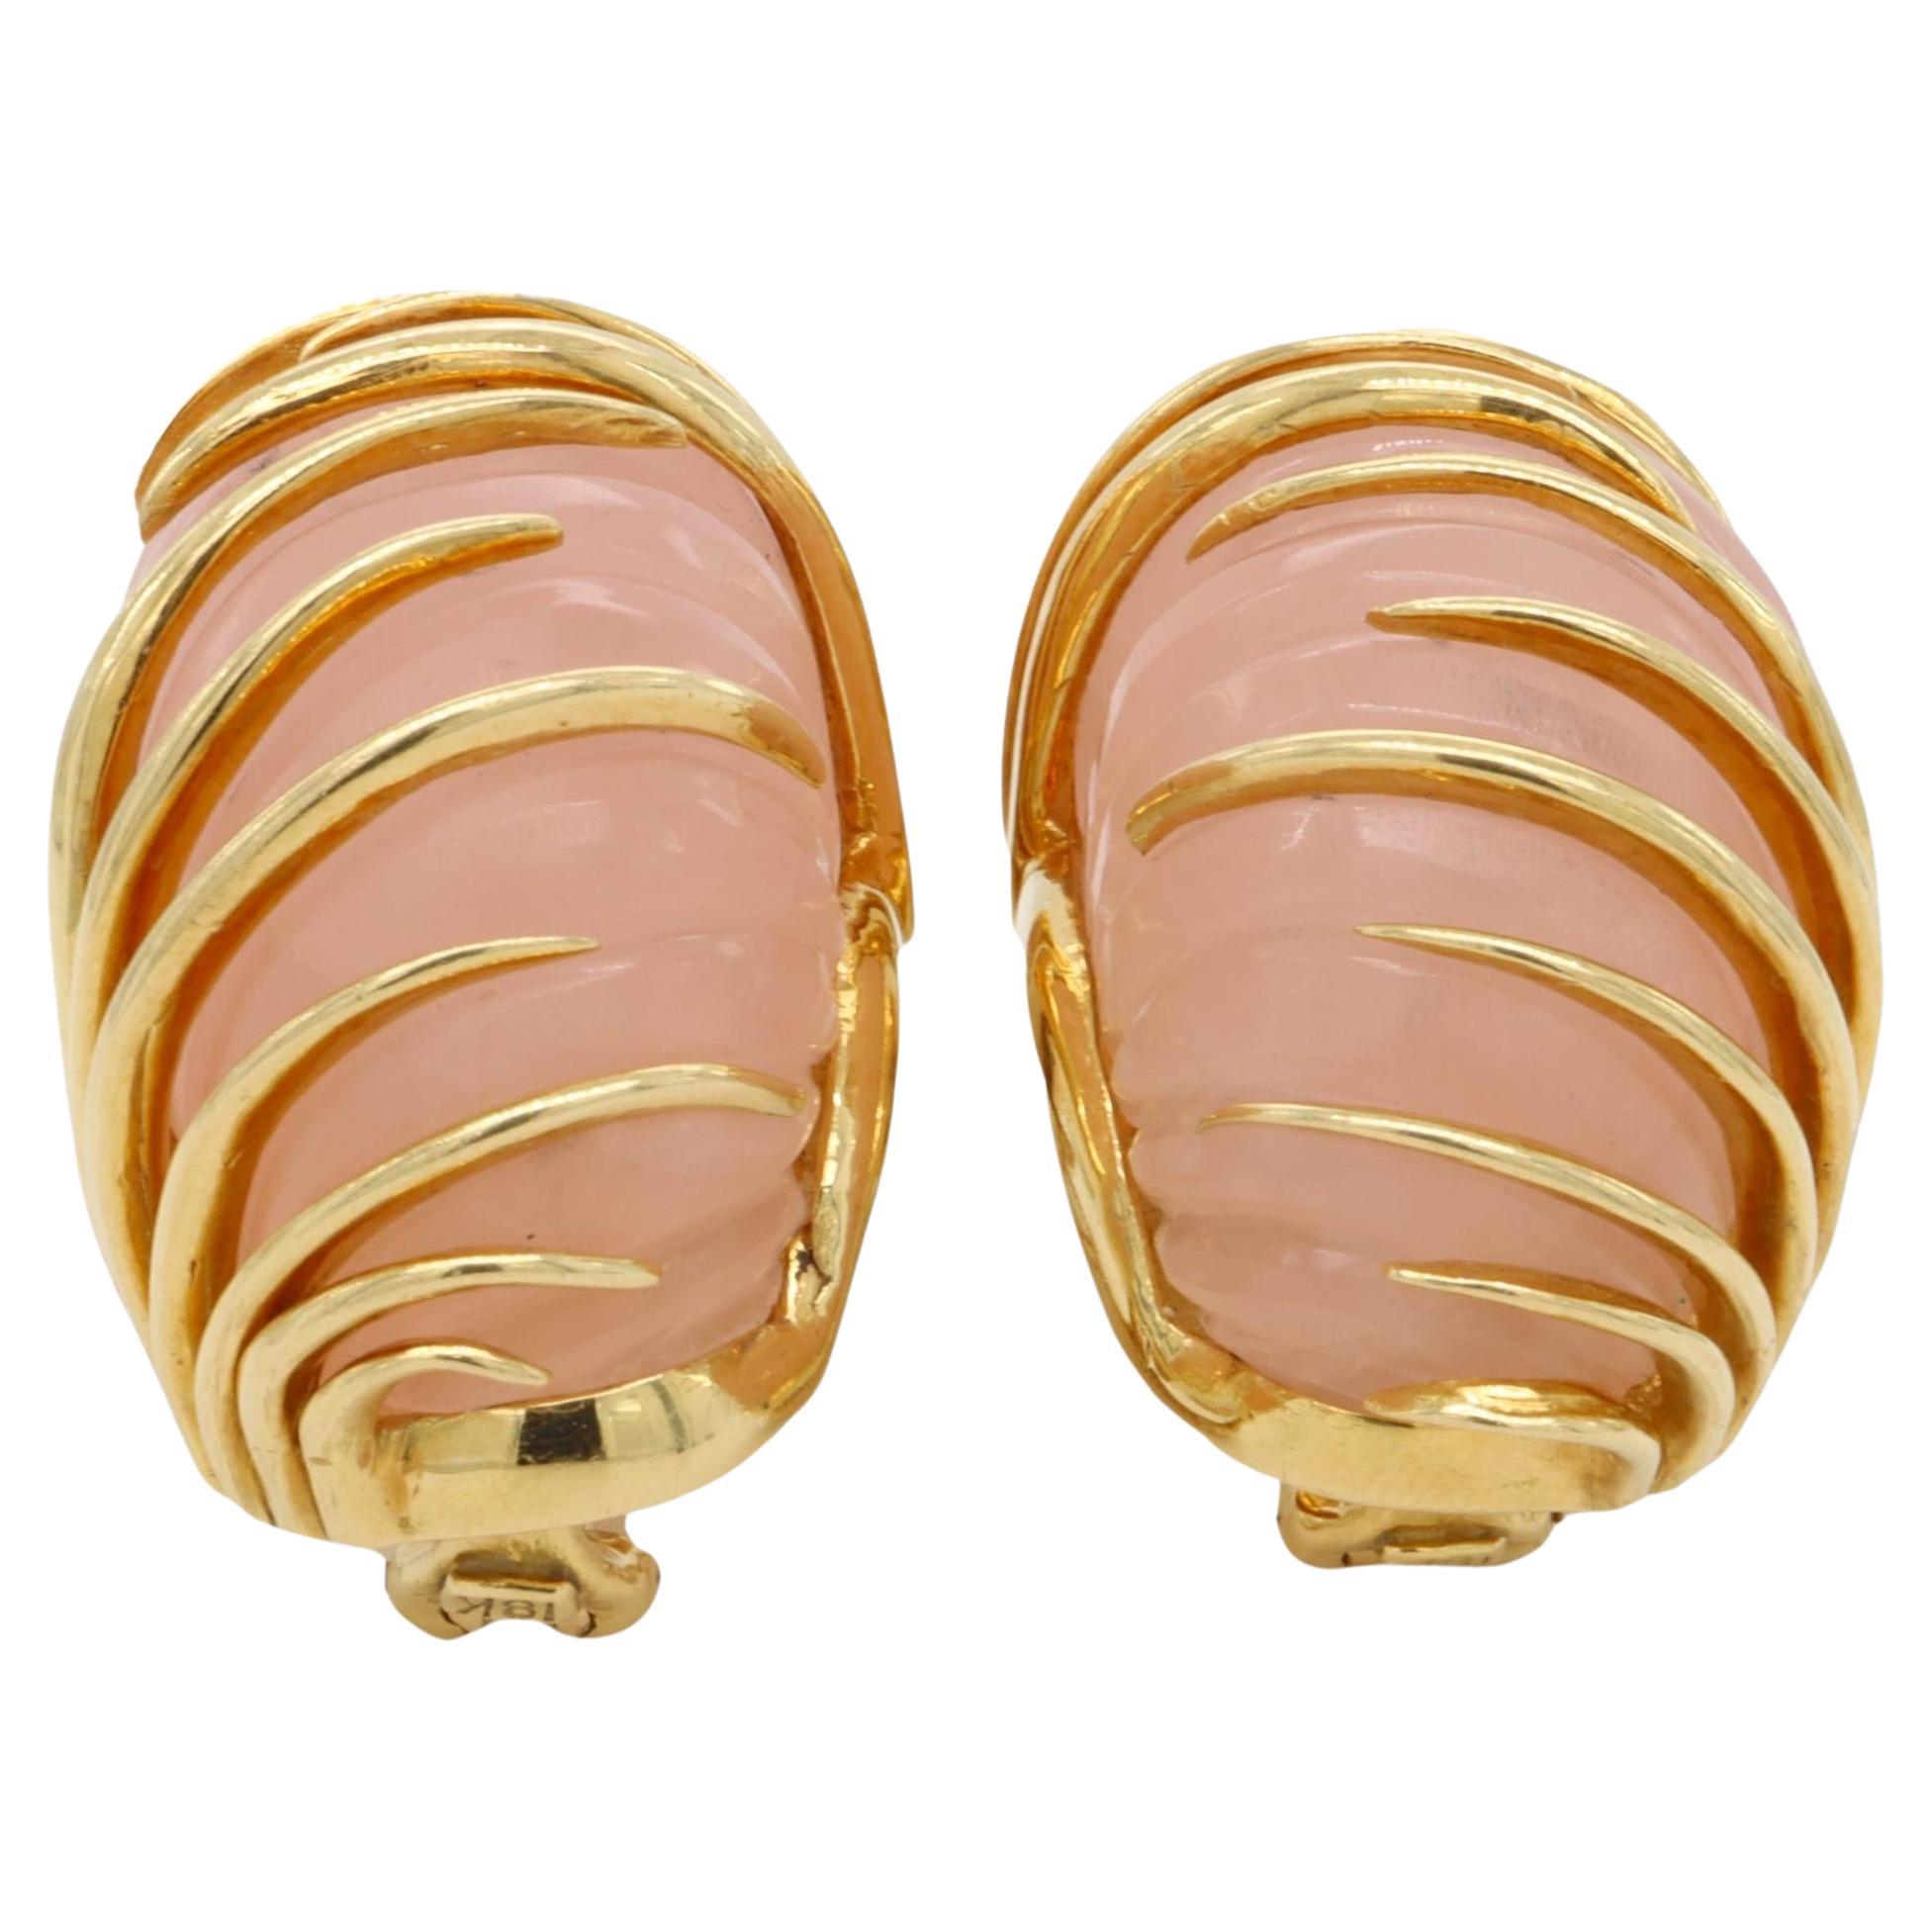 Pair of Vintage Van Cleef and Arpels earrings finely crafted in 18 karat yellow gold each featuring a carved rose quartz crystal encased by staggered tapered knife edge bands and Large Omega Clip Backs. Fully hallmarked with logo, serial numbers and